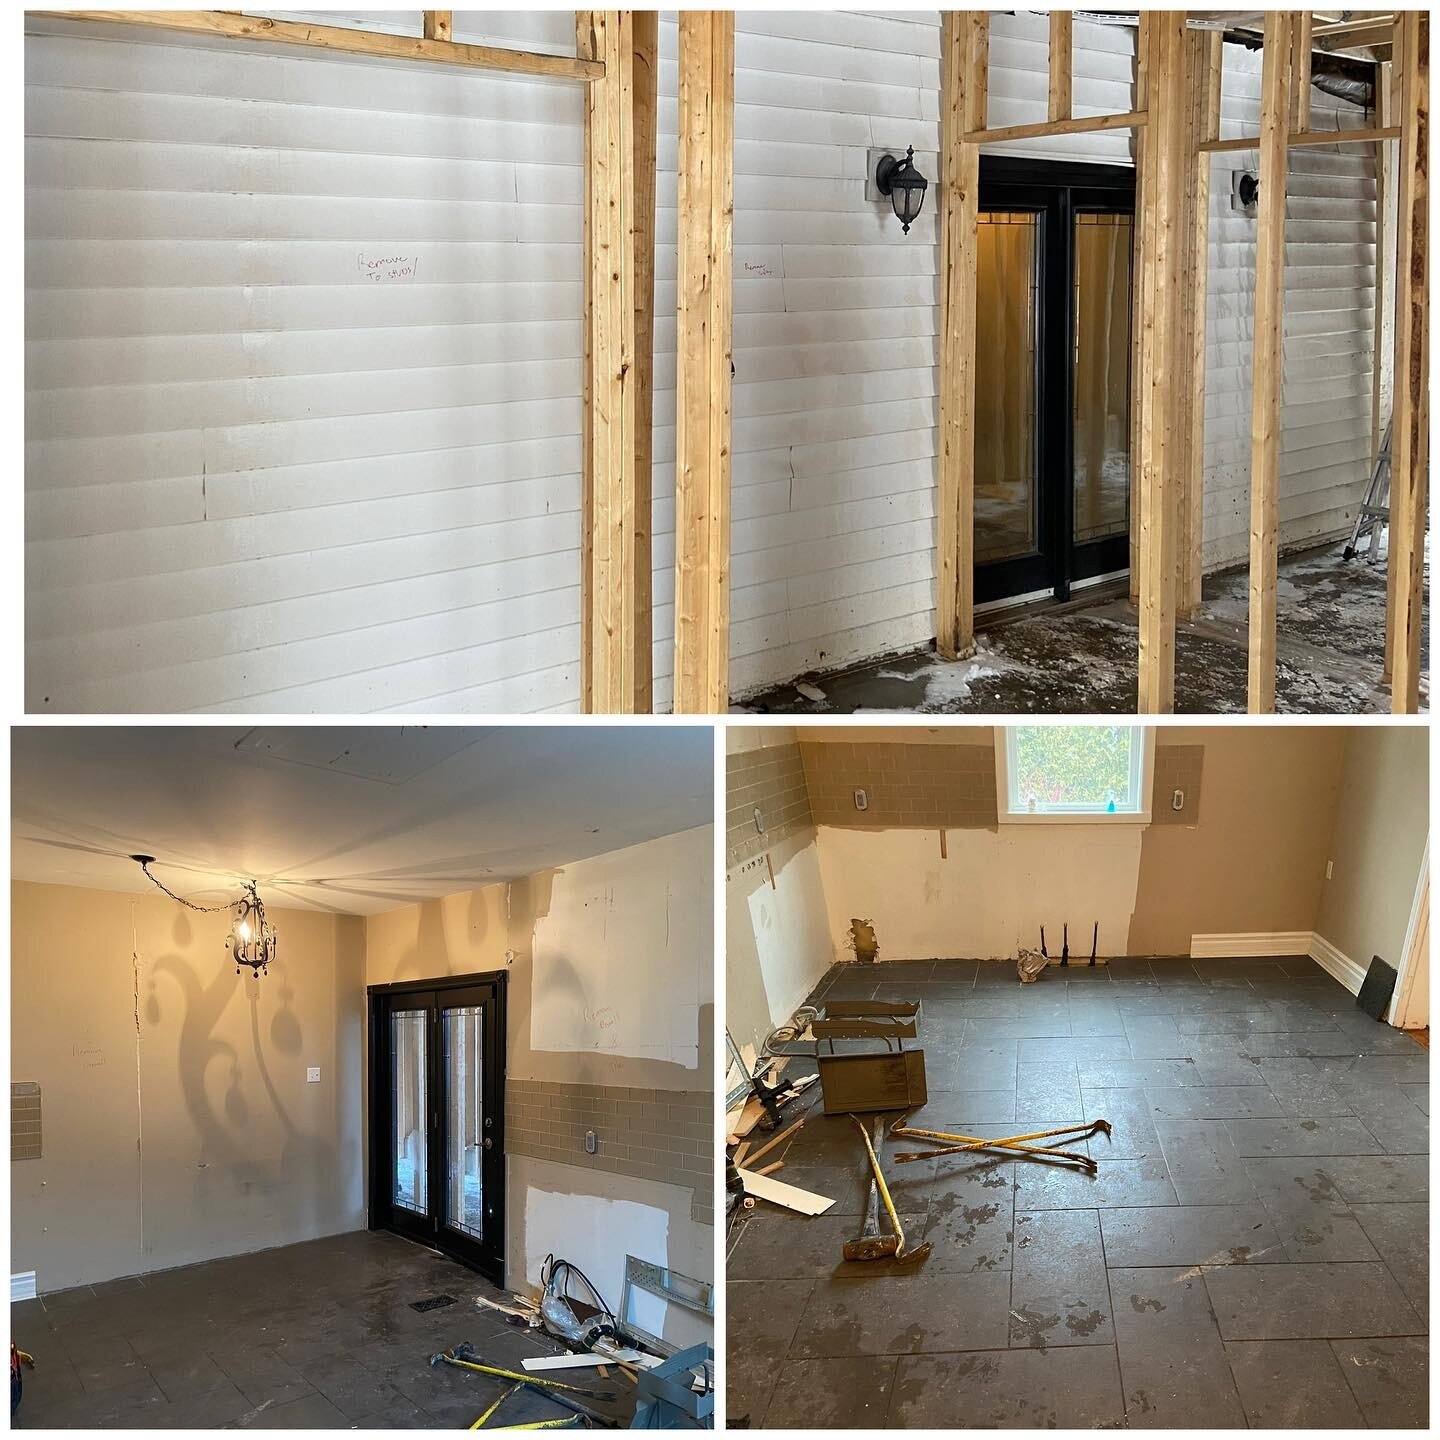 This water down home received a large addition and needed a little interior/exterior demolition to begin the architectural changes. #demolition #demo #renovations #renovation #toronto #torontorenovations #hamiltonrealestate #hamiltonrealtor #hamilton